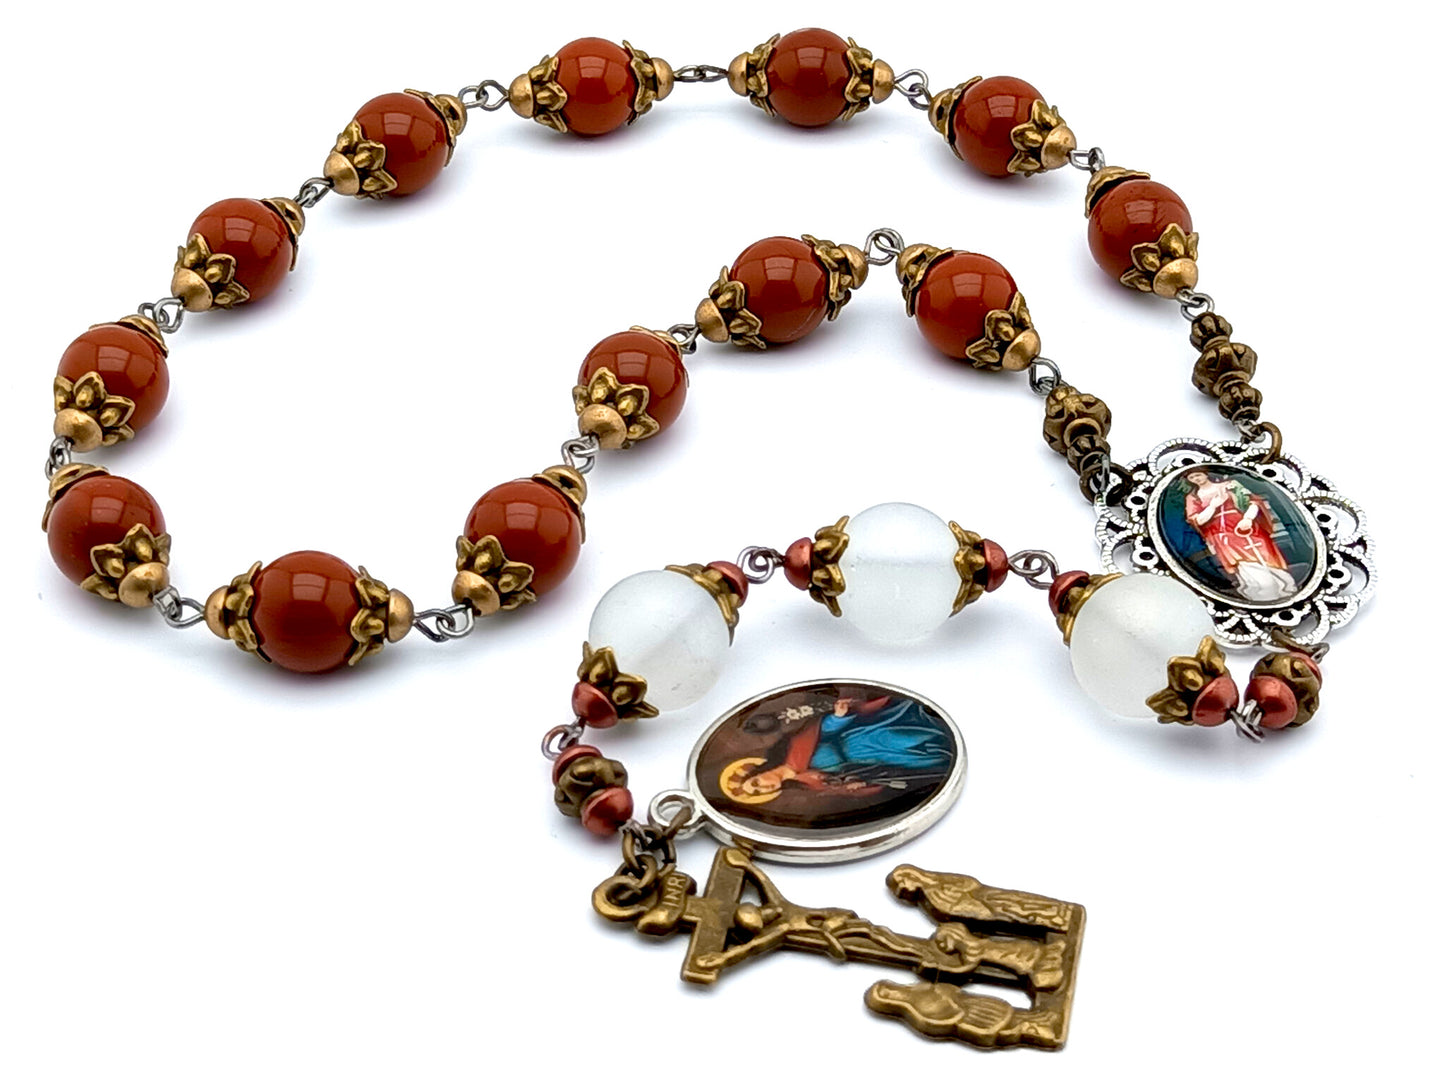 Saint Philomena unique rosary beads prayer chaplet with red jasper and white glass beads, bronze two Marys crucifix and silver picture centre medal.